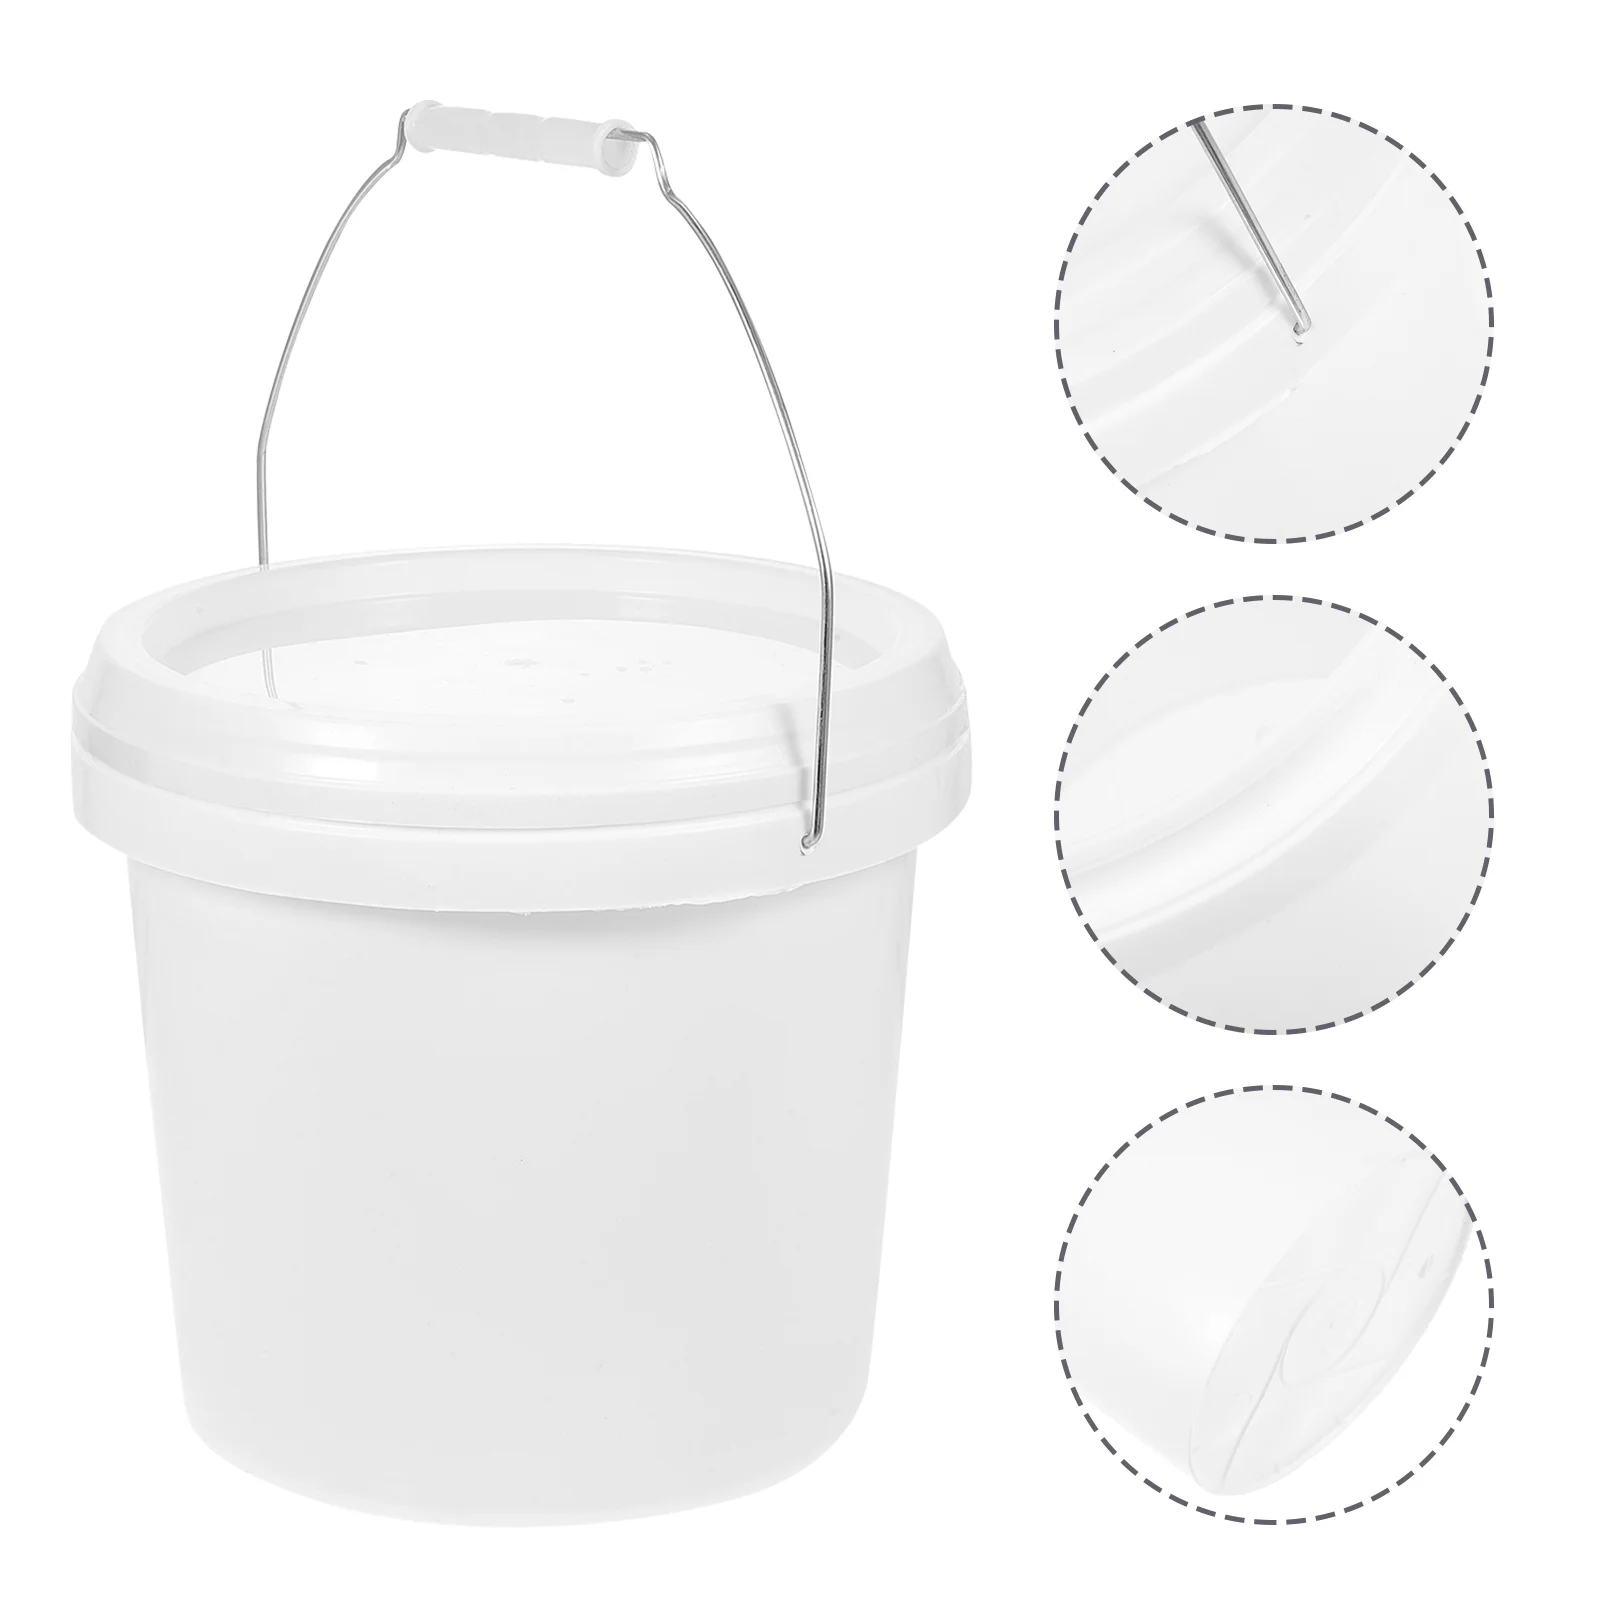 sterilite 18 gallon tote box plastic gray set of 8 storage boxes（blue pink gray）optional Plastic Paint Can 1 Gallon Bucket Lid Handle Empty Paint Can 4L Water Bucket Paint Pail Multipurpose Storage Container